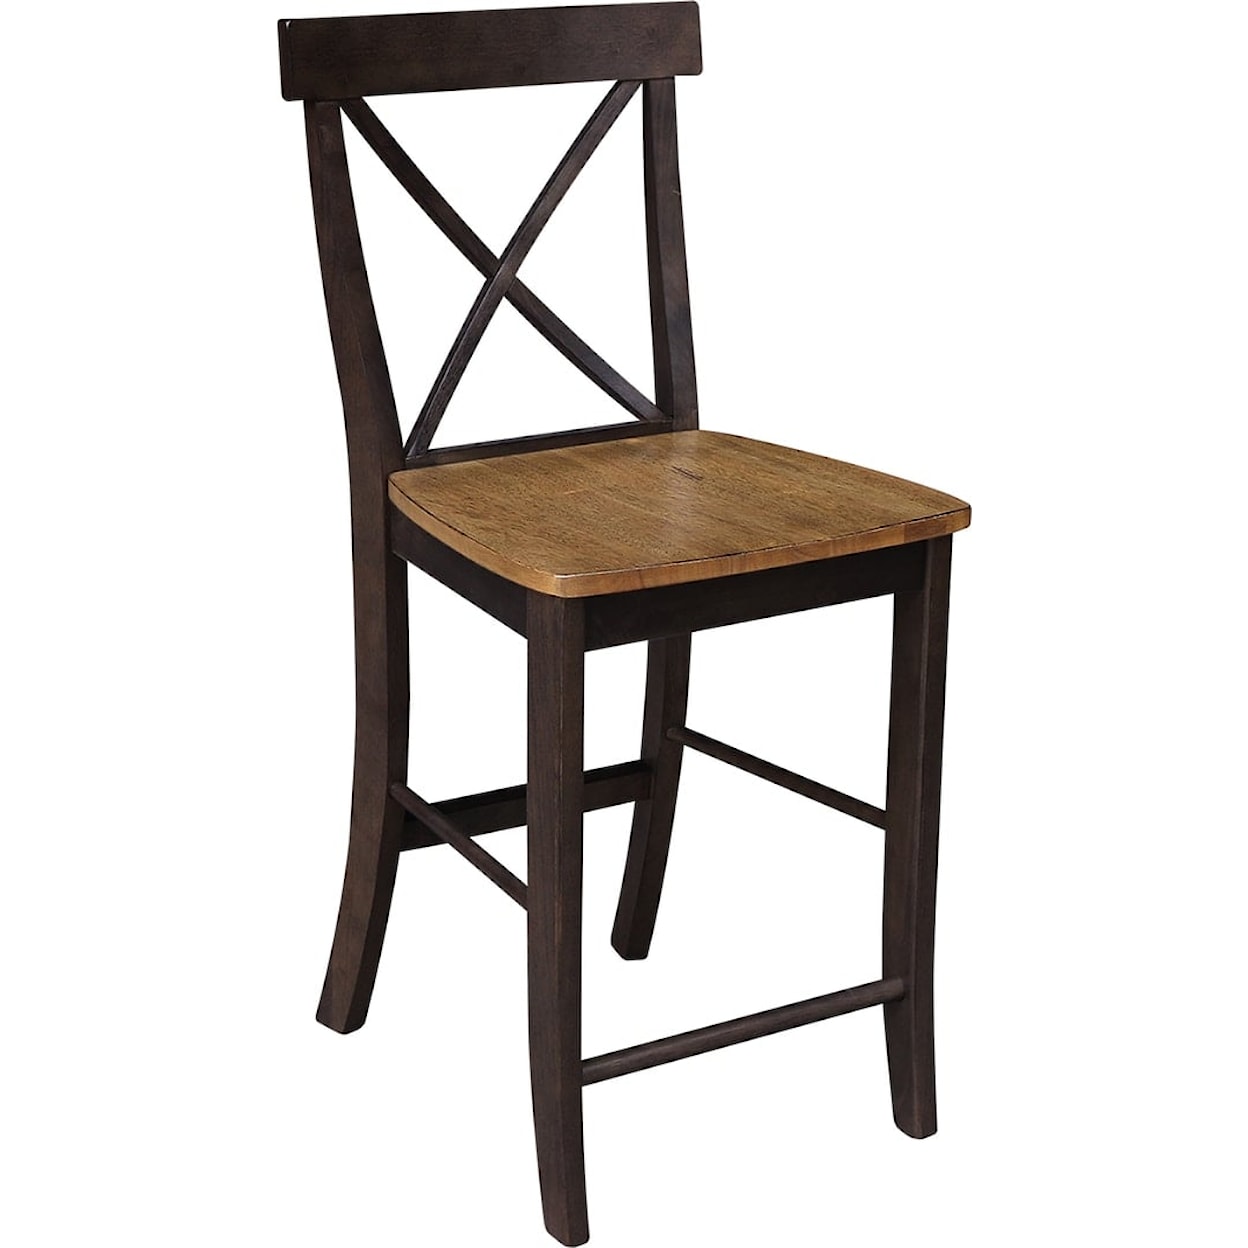 John Thomas Dining Essentials X-Back Stool in Hickory Coal